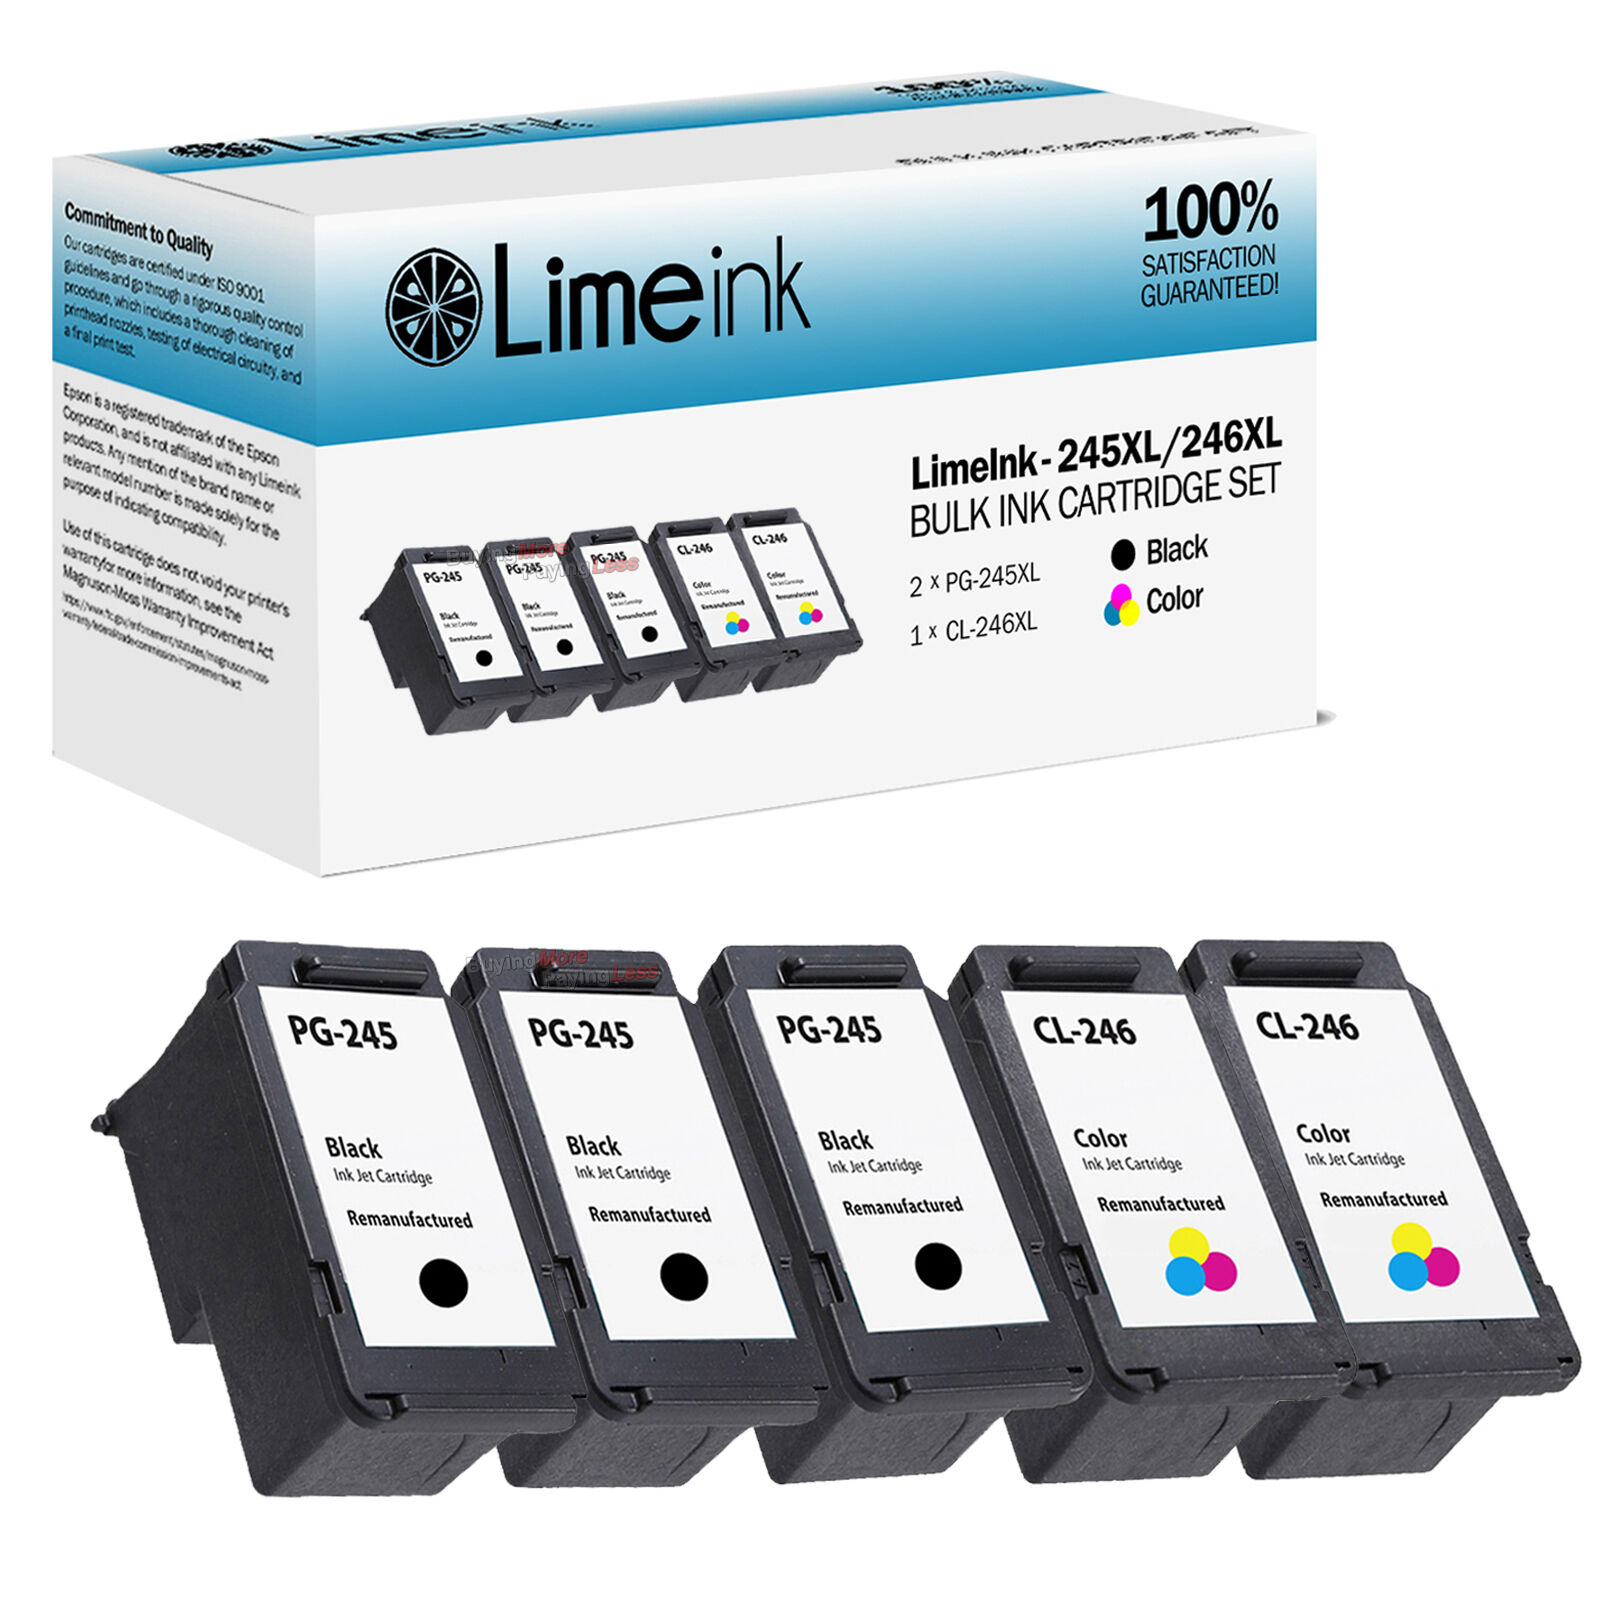 5 PG-245XL CL-246XL Ink Cartridges For Canon PIXMA iP2820 MG2420 MG2520 MG2920